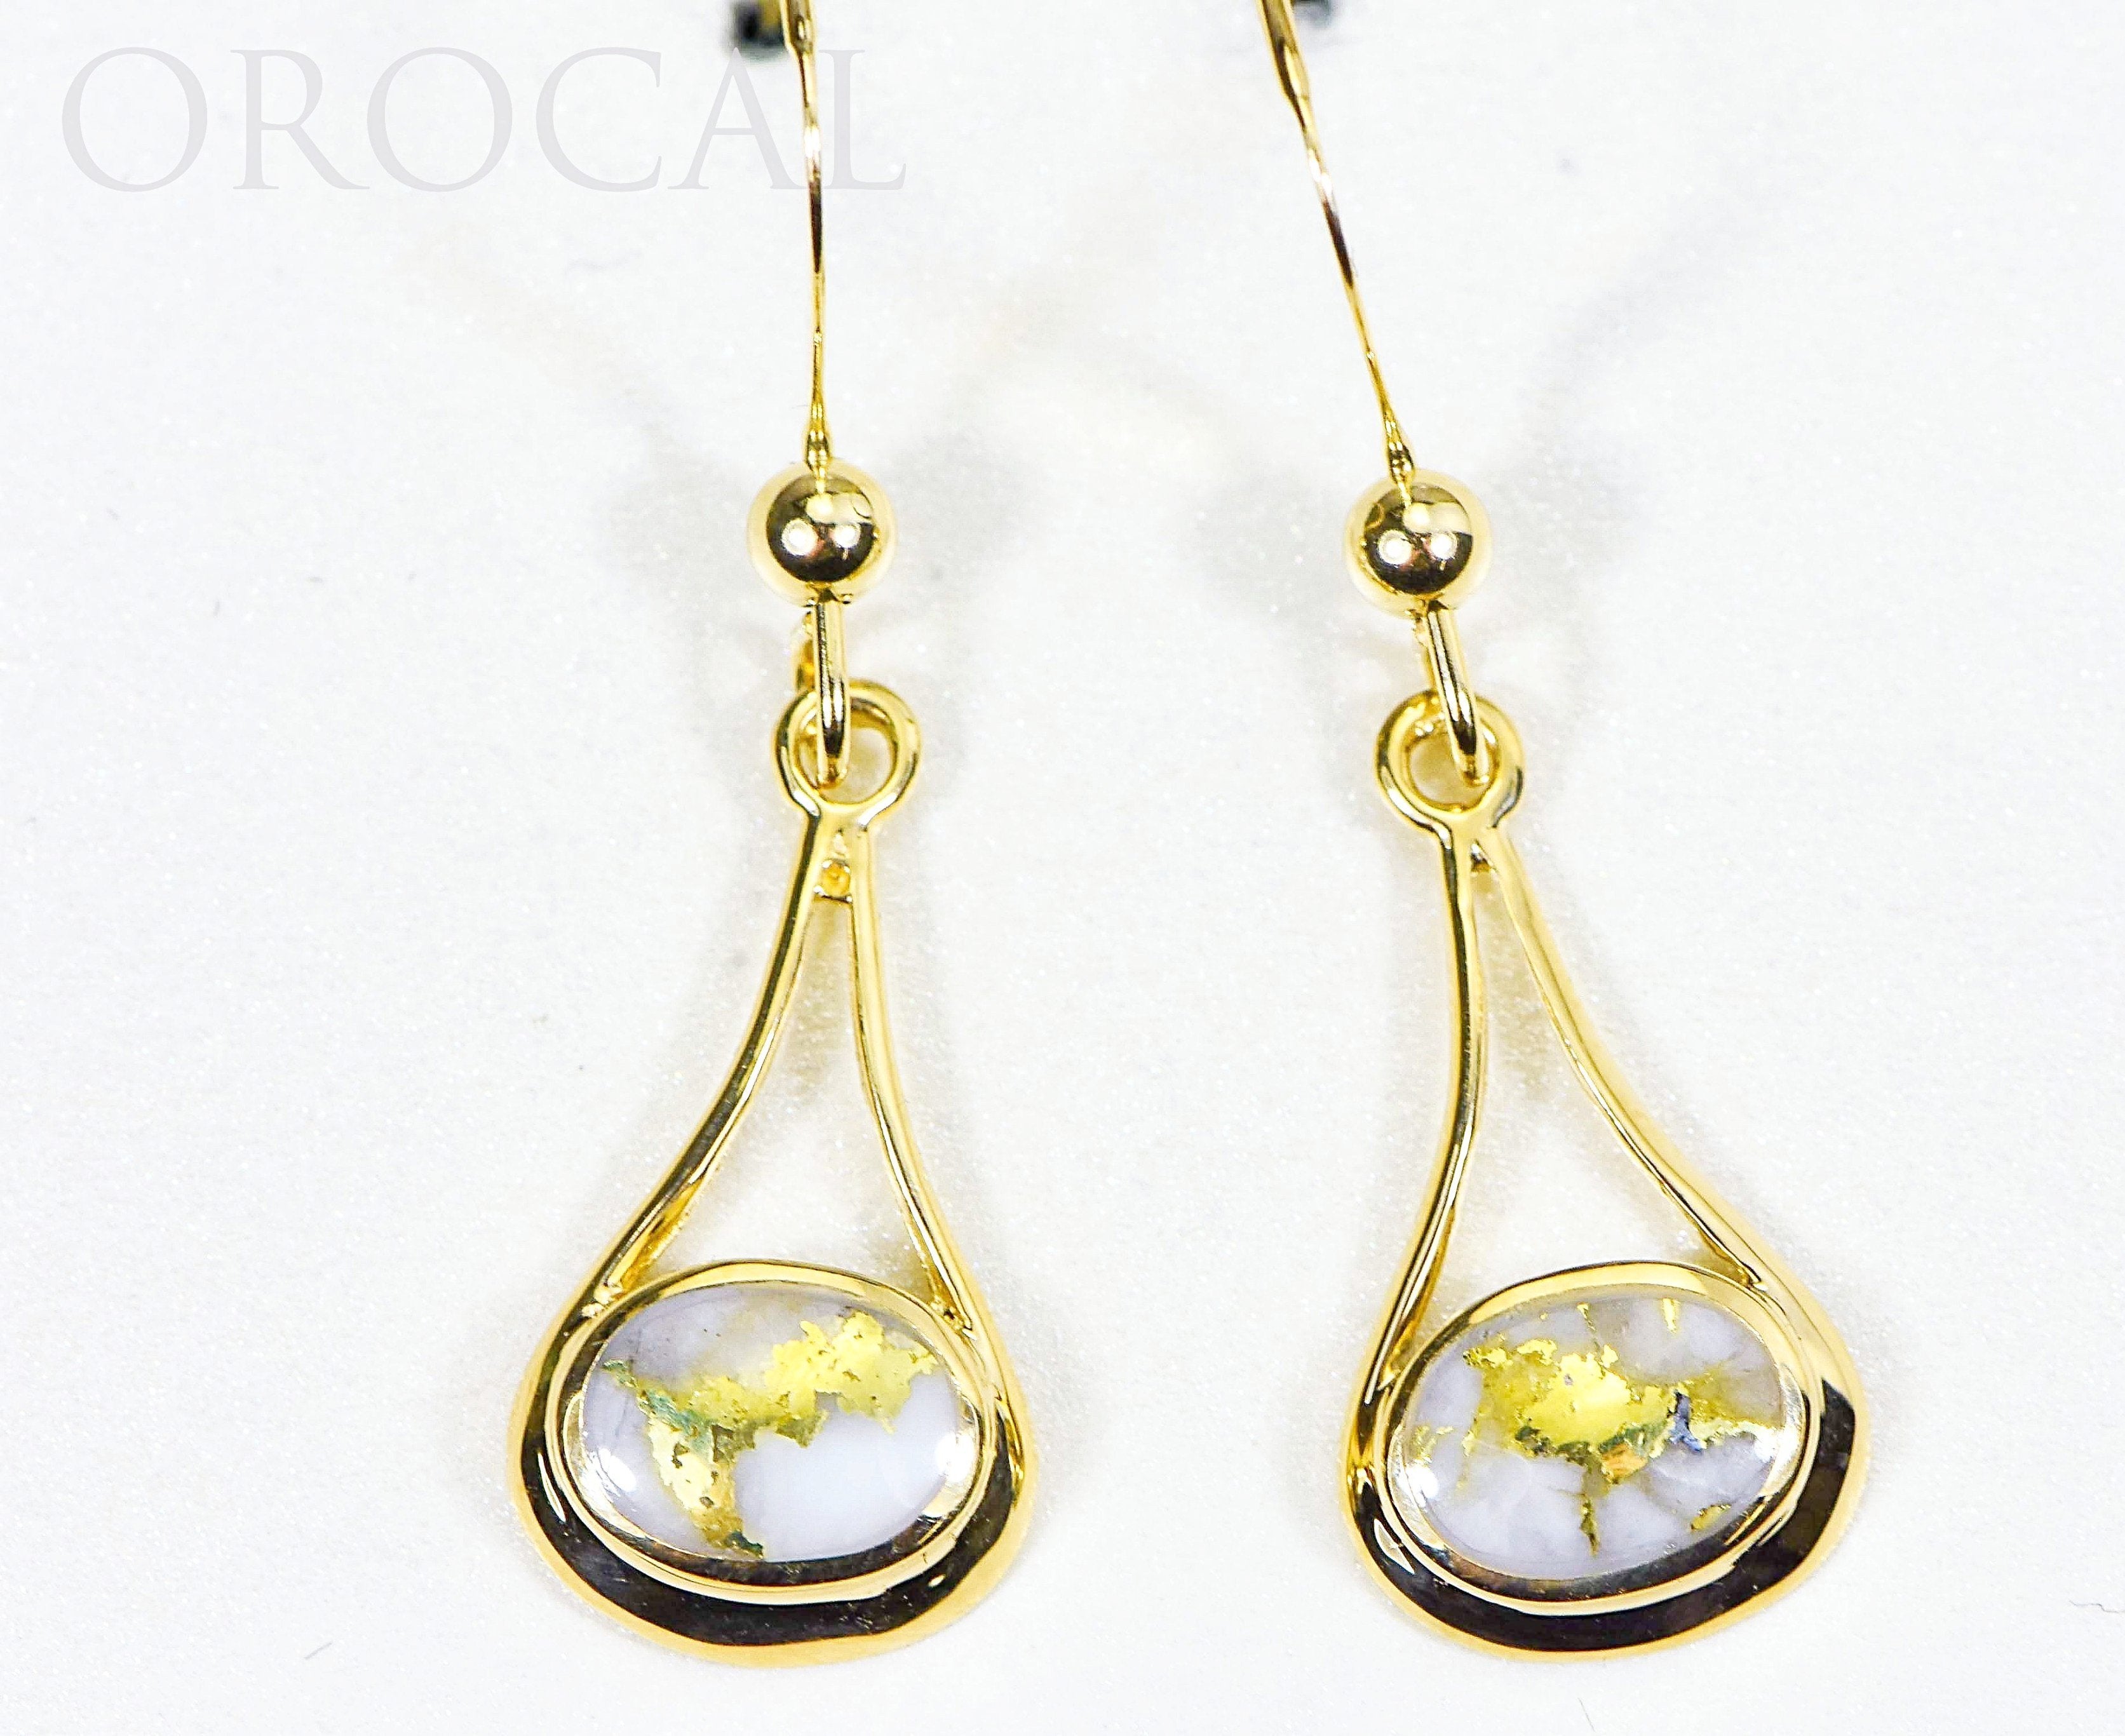 Gold Quartz Earrings "Orocal" EN871Q/WD Genuine Hand Crafted Jewelry - 14K Gold Casting